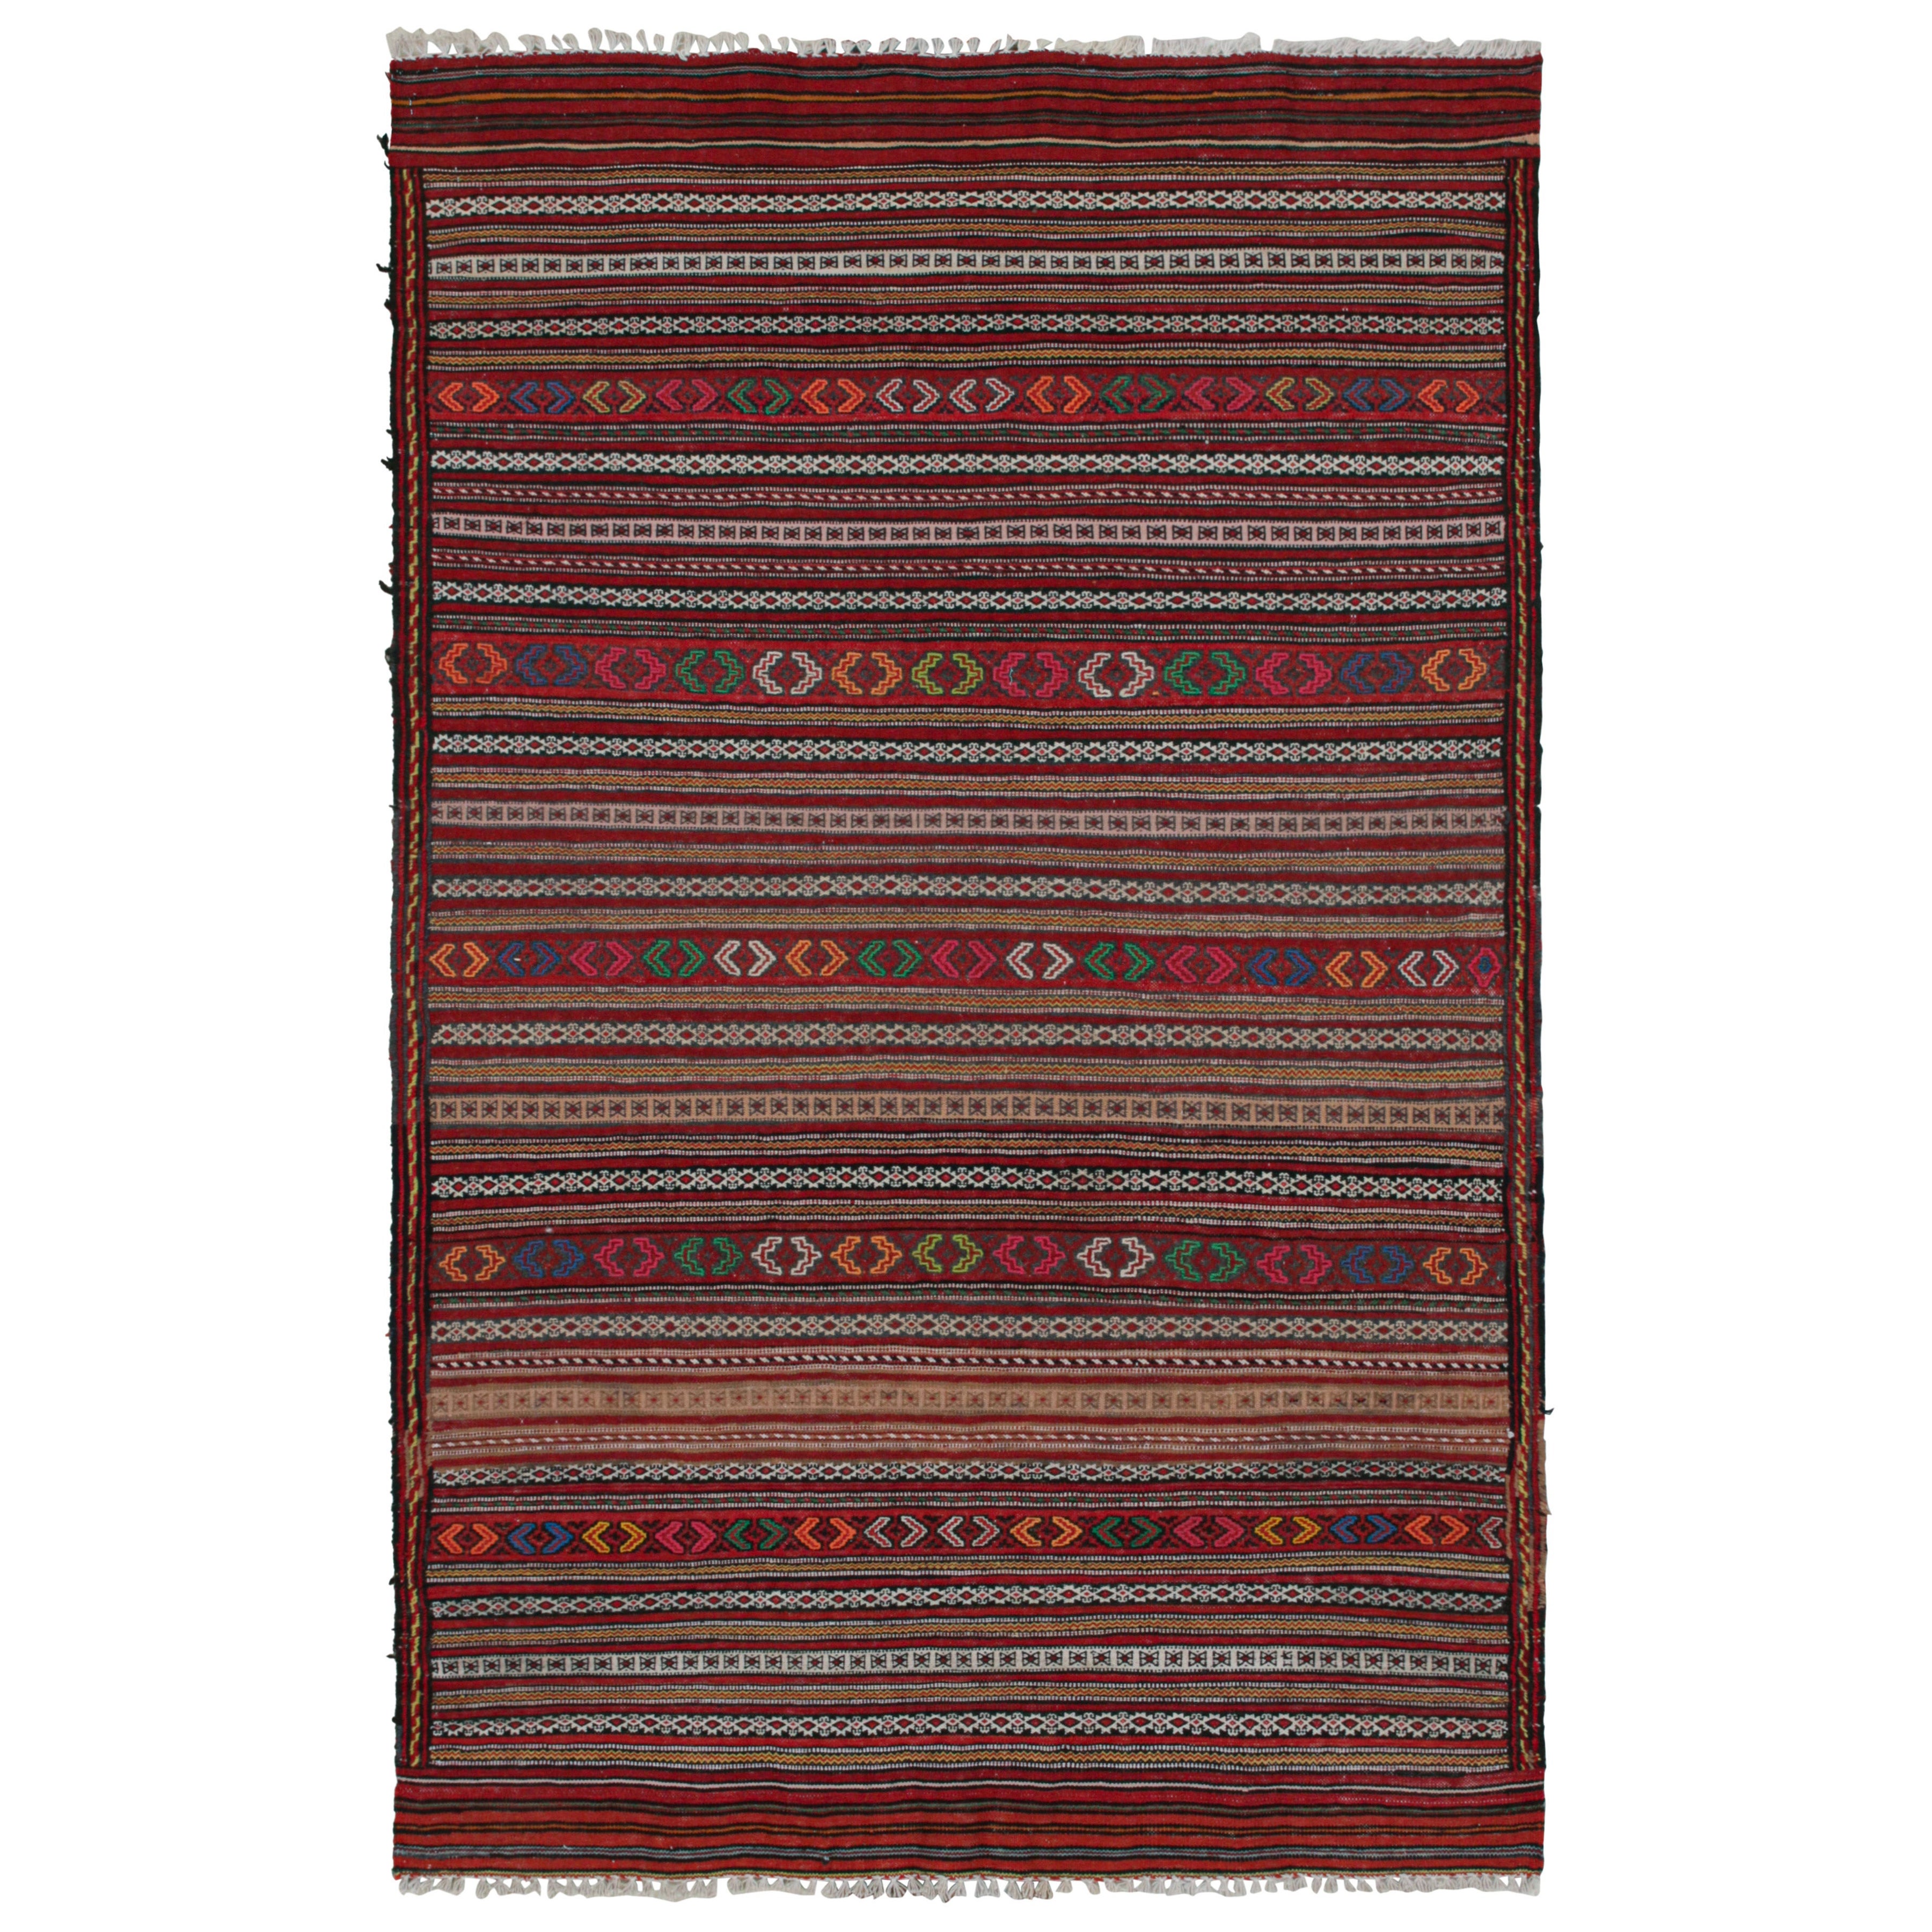 Vintage Baluch Kilim Rug in Red with Stripes and Tribal Motifs, from Rug & Kilim